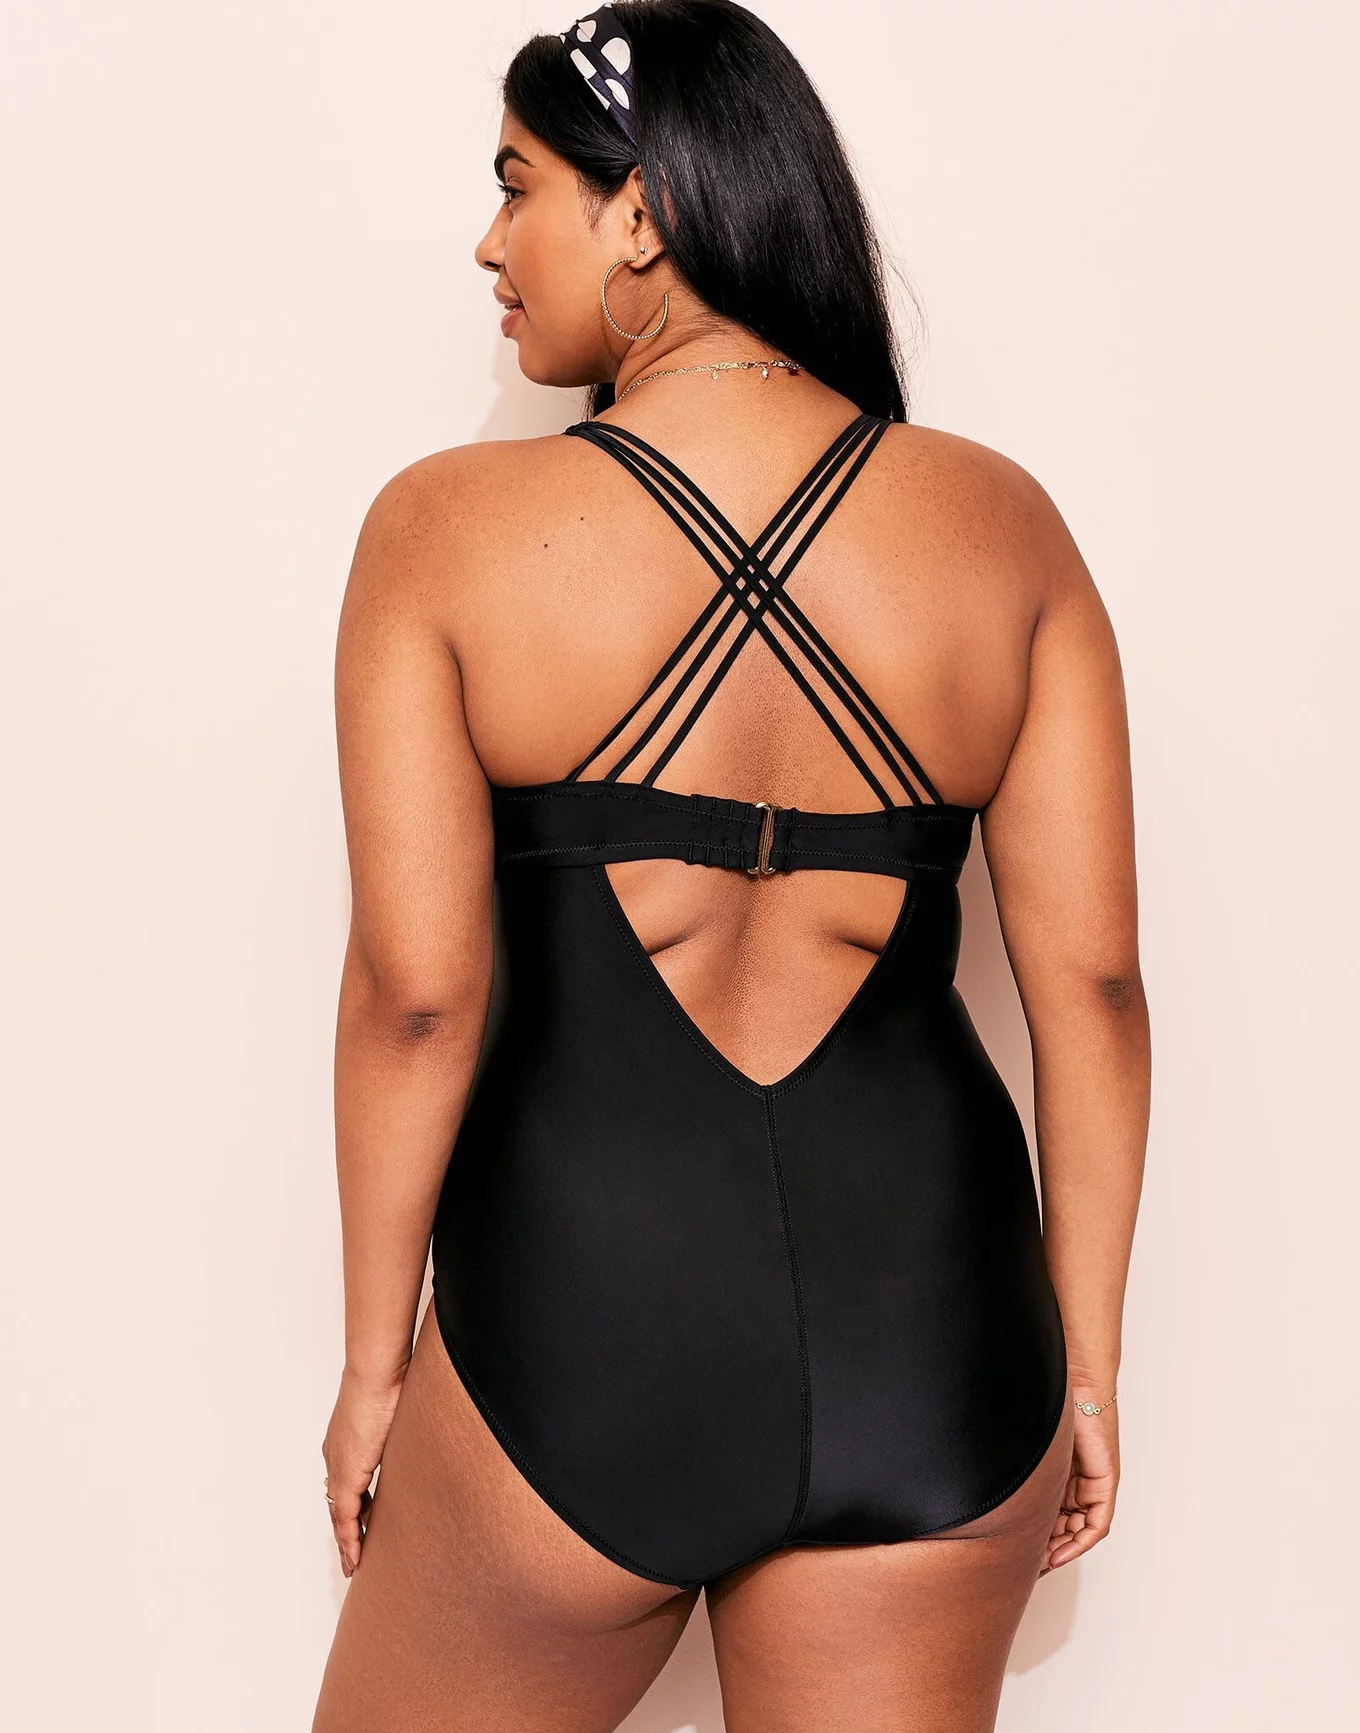 Elevated Evie  Swimsuits, Bathing suits, Swimwear